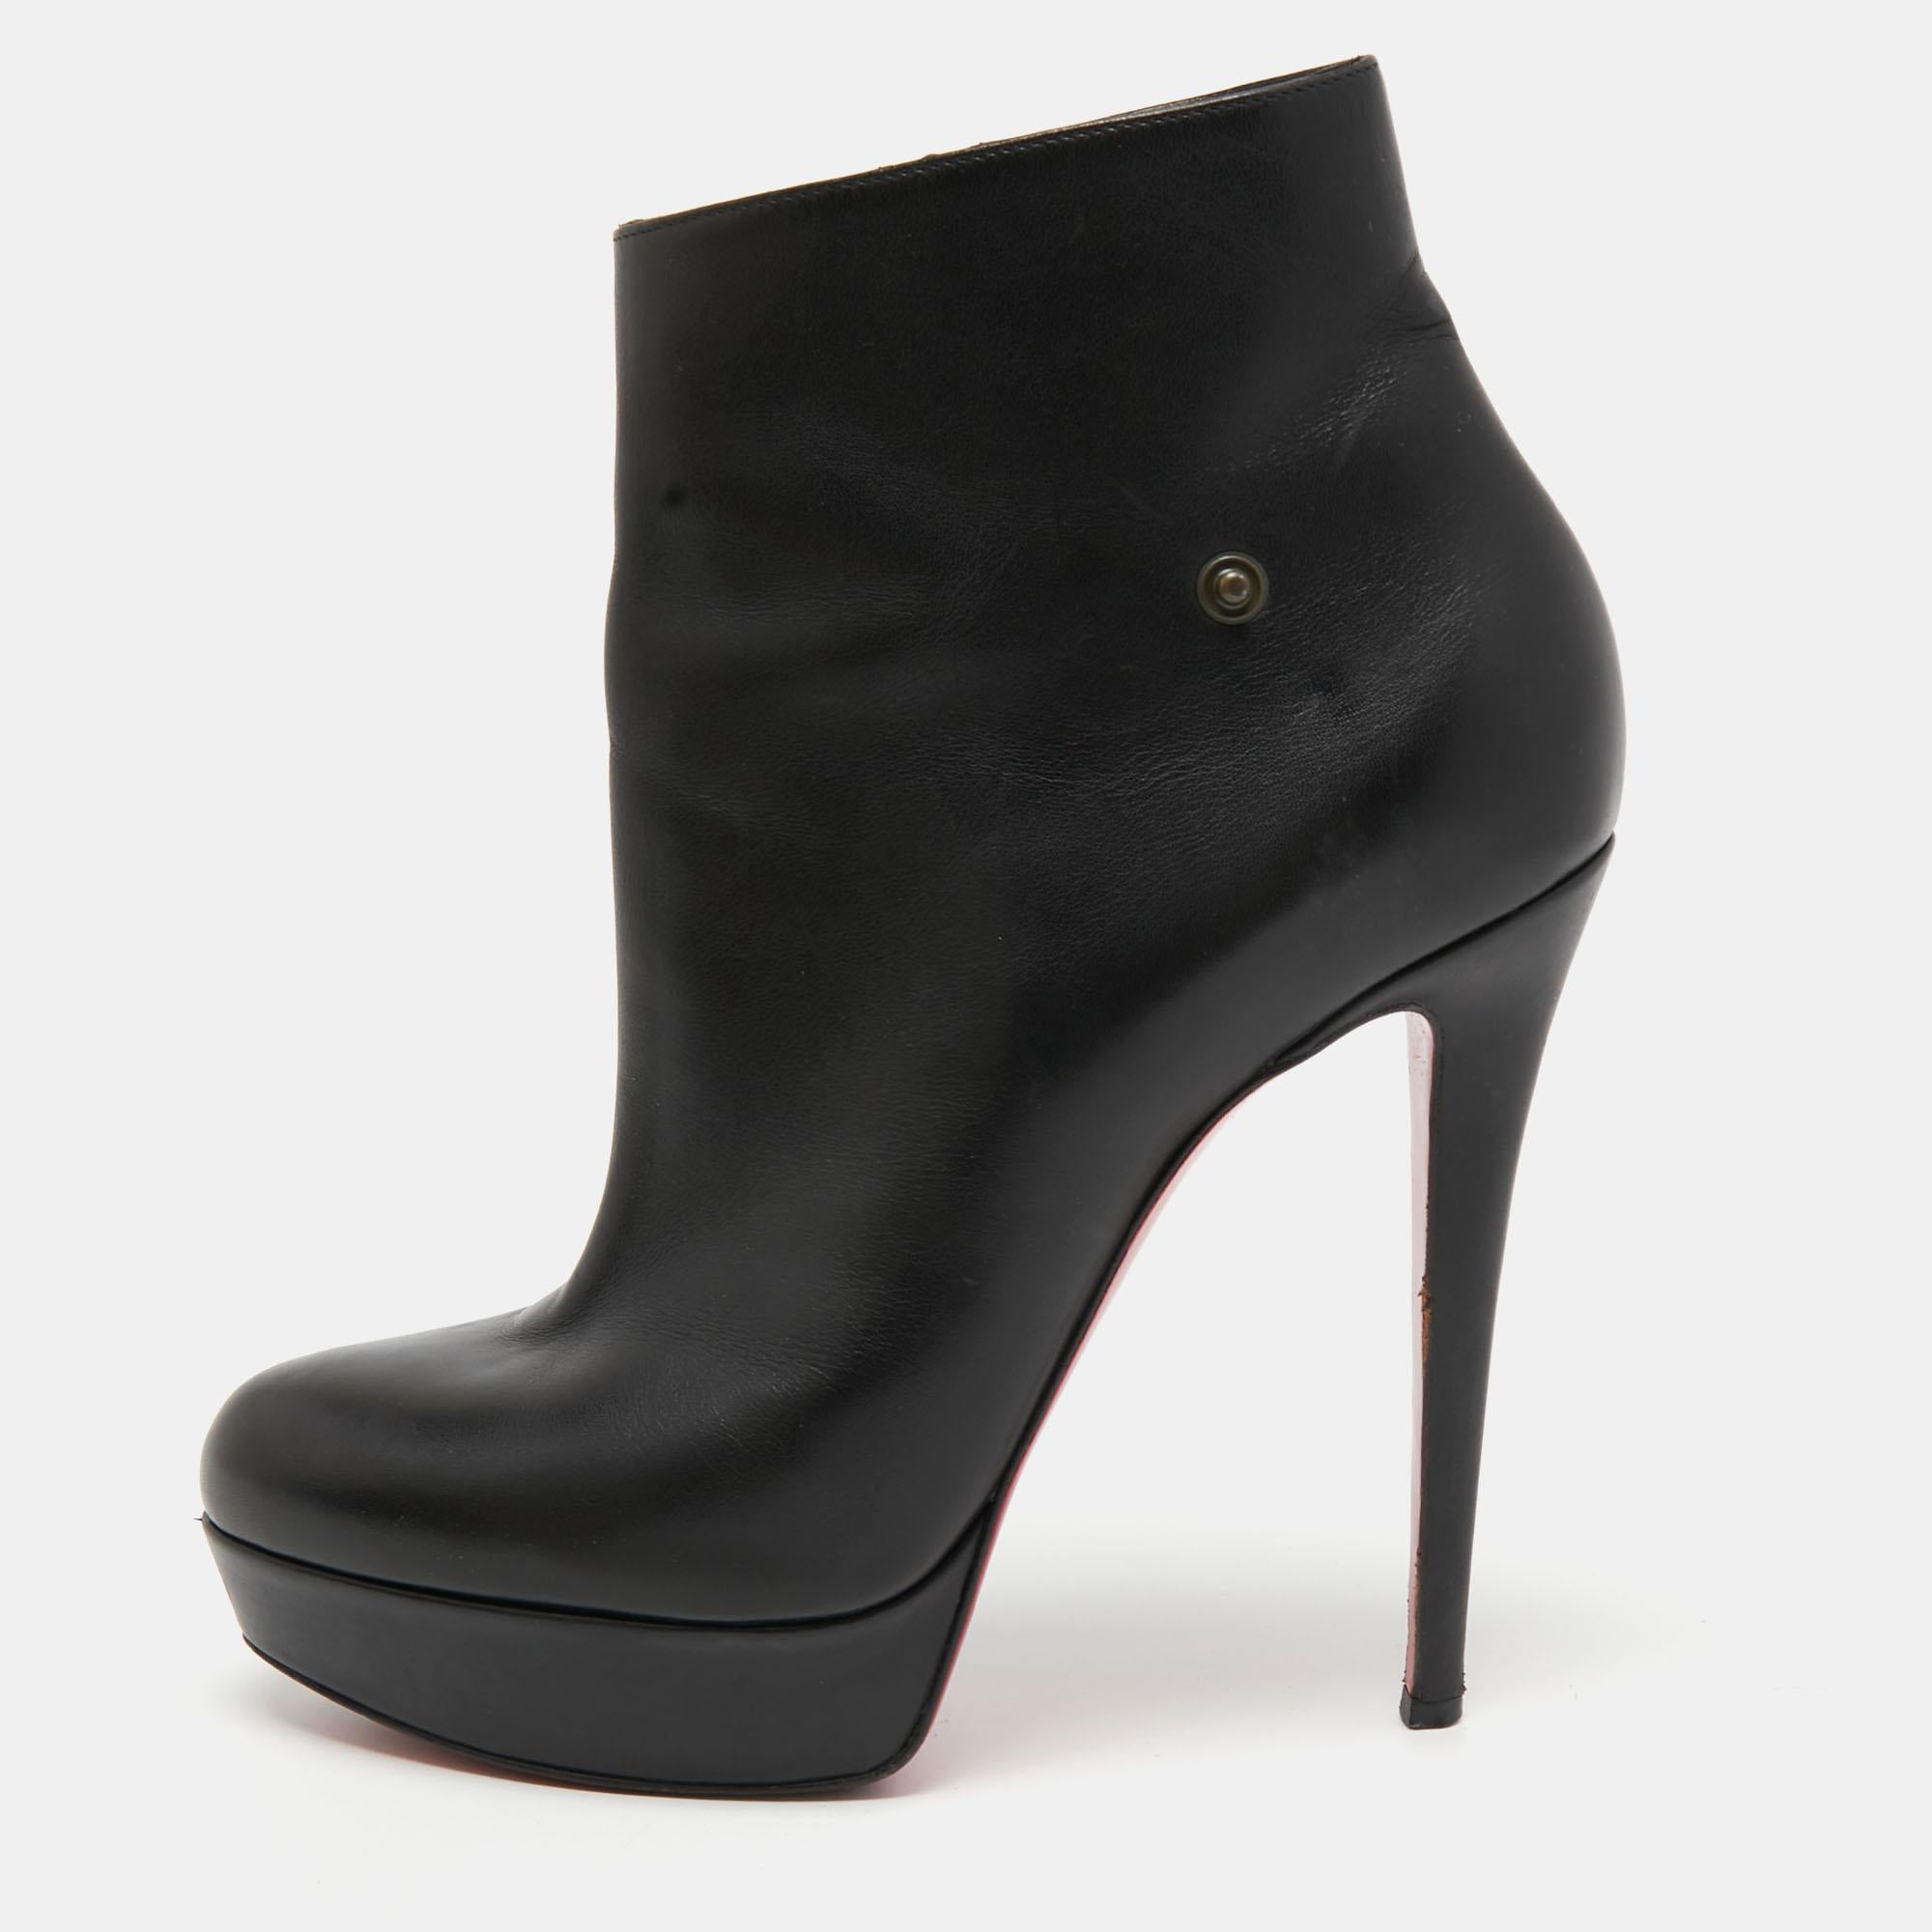 Enjoy the most fashionable days with these stylish Christian Louboutin boots. Modern in design and craftsmanship, they are fashioned to keep you comfortable and chic!

Includes: Original Dustbag

